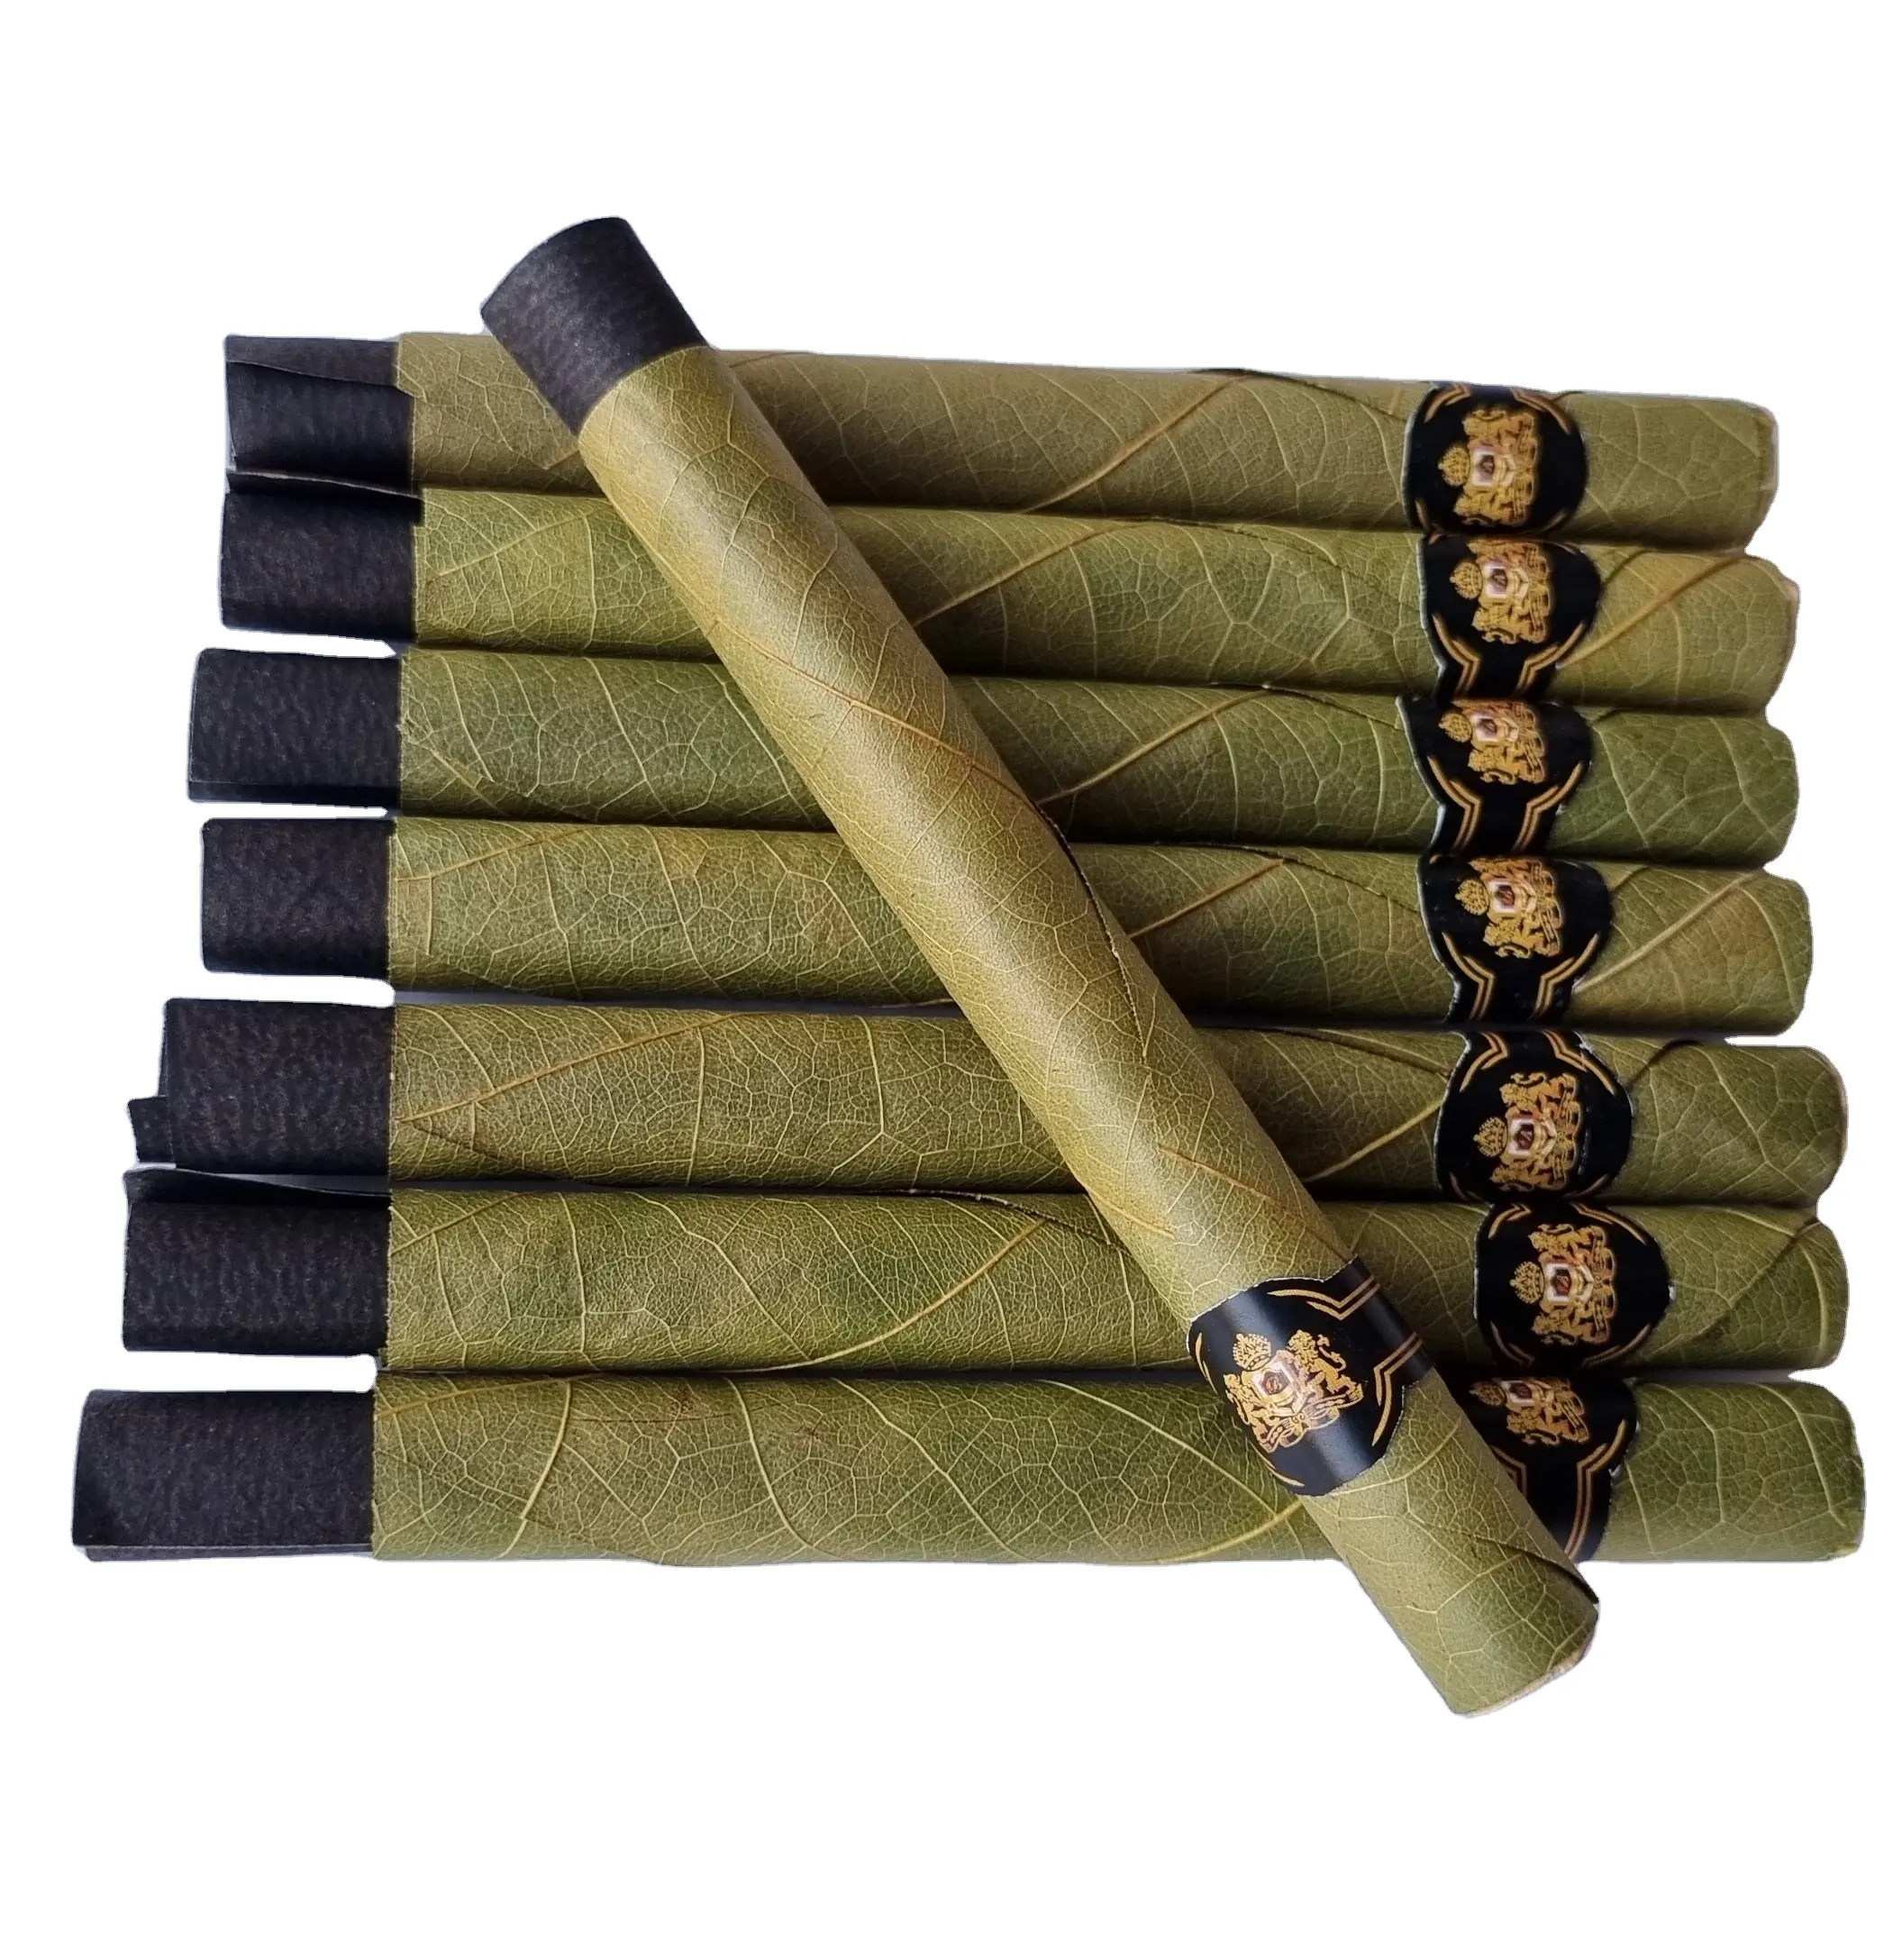 Vegan organic natural palm Leaf Rolls All sizes available rolls tubes in custom size 4 USA Leaf Straight tubes Rolls Palm Leaf